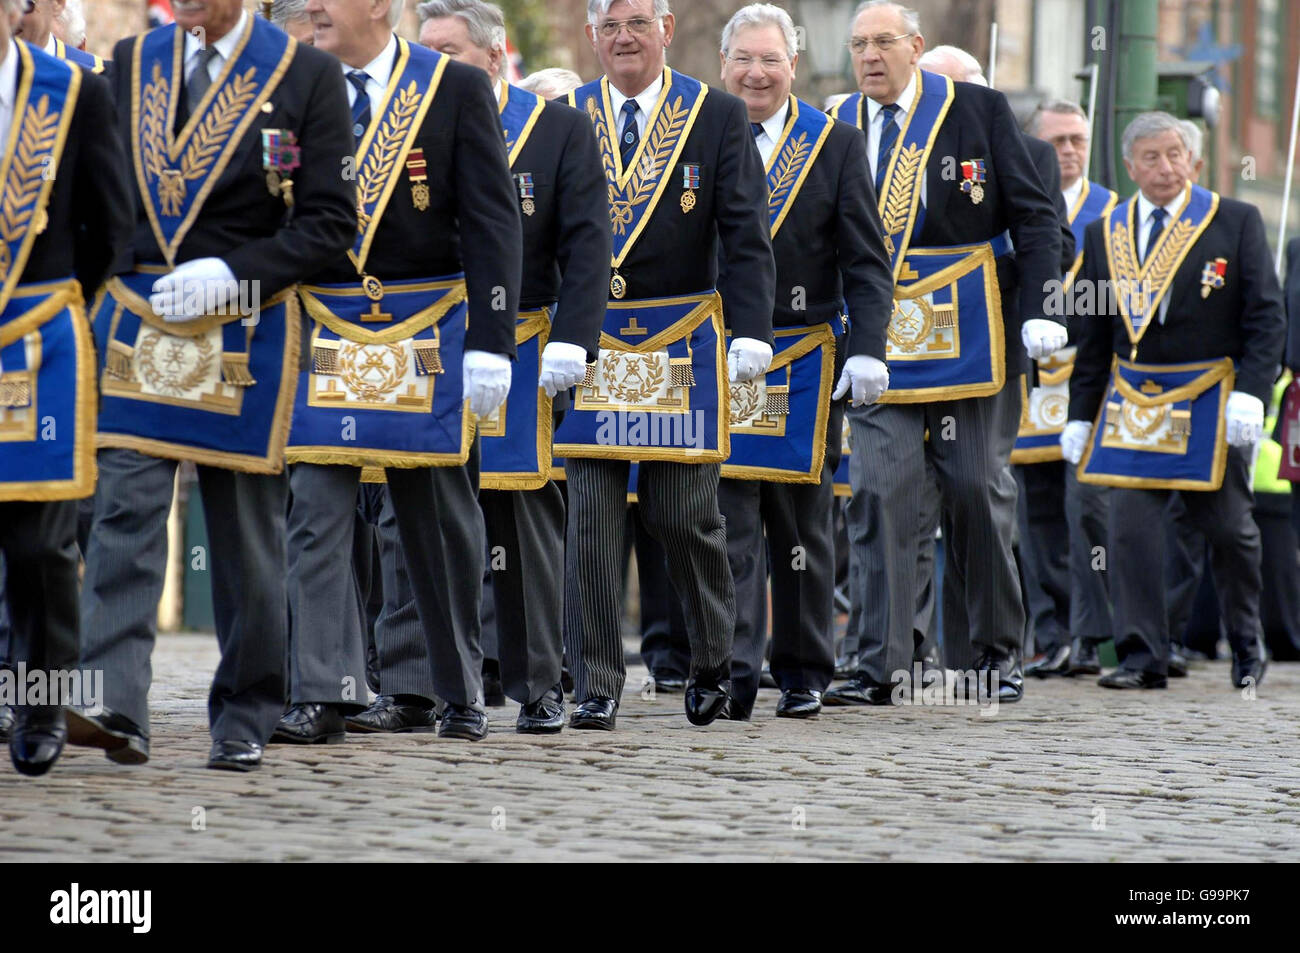 Masons march in a procession to mark the opening of the Beamish Masonic Hall at the North of England Open Air Museum in County Durham. Stock Photo